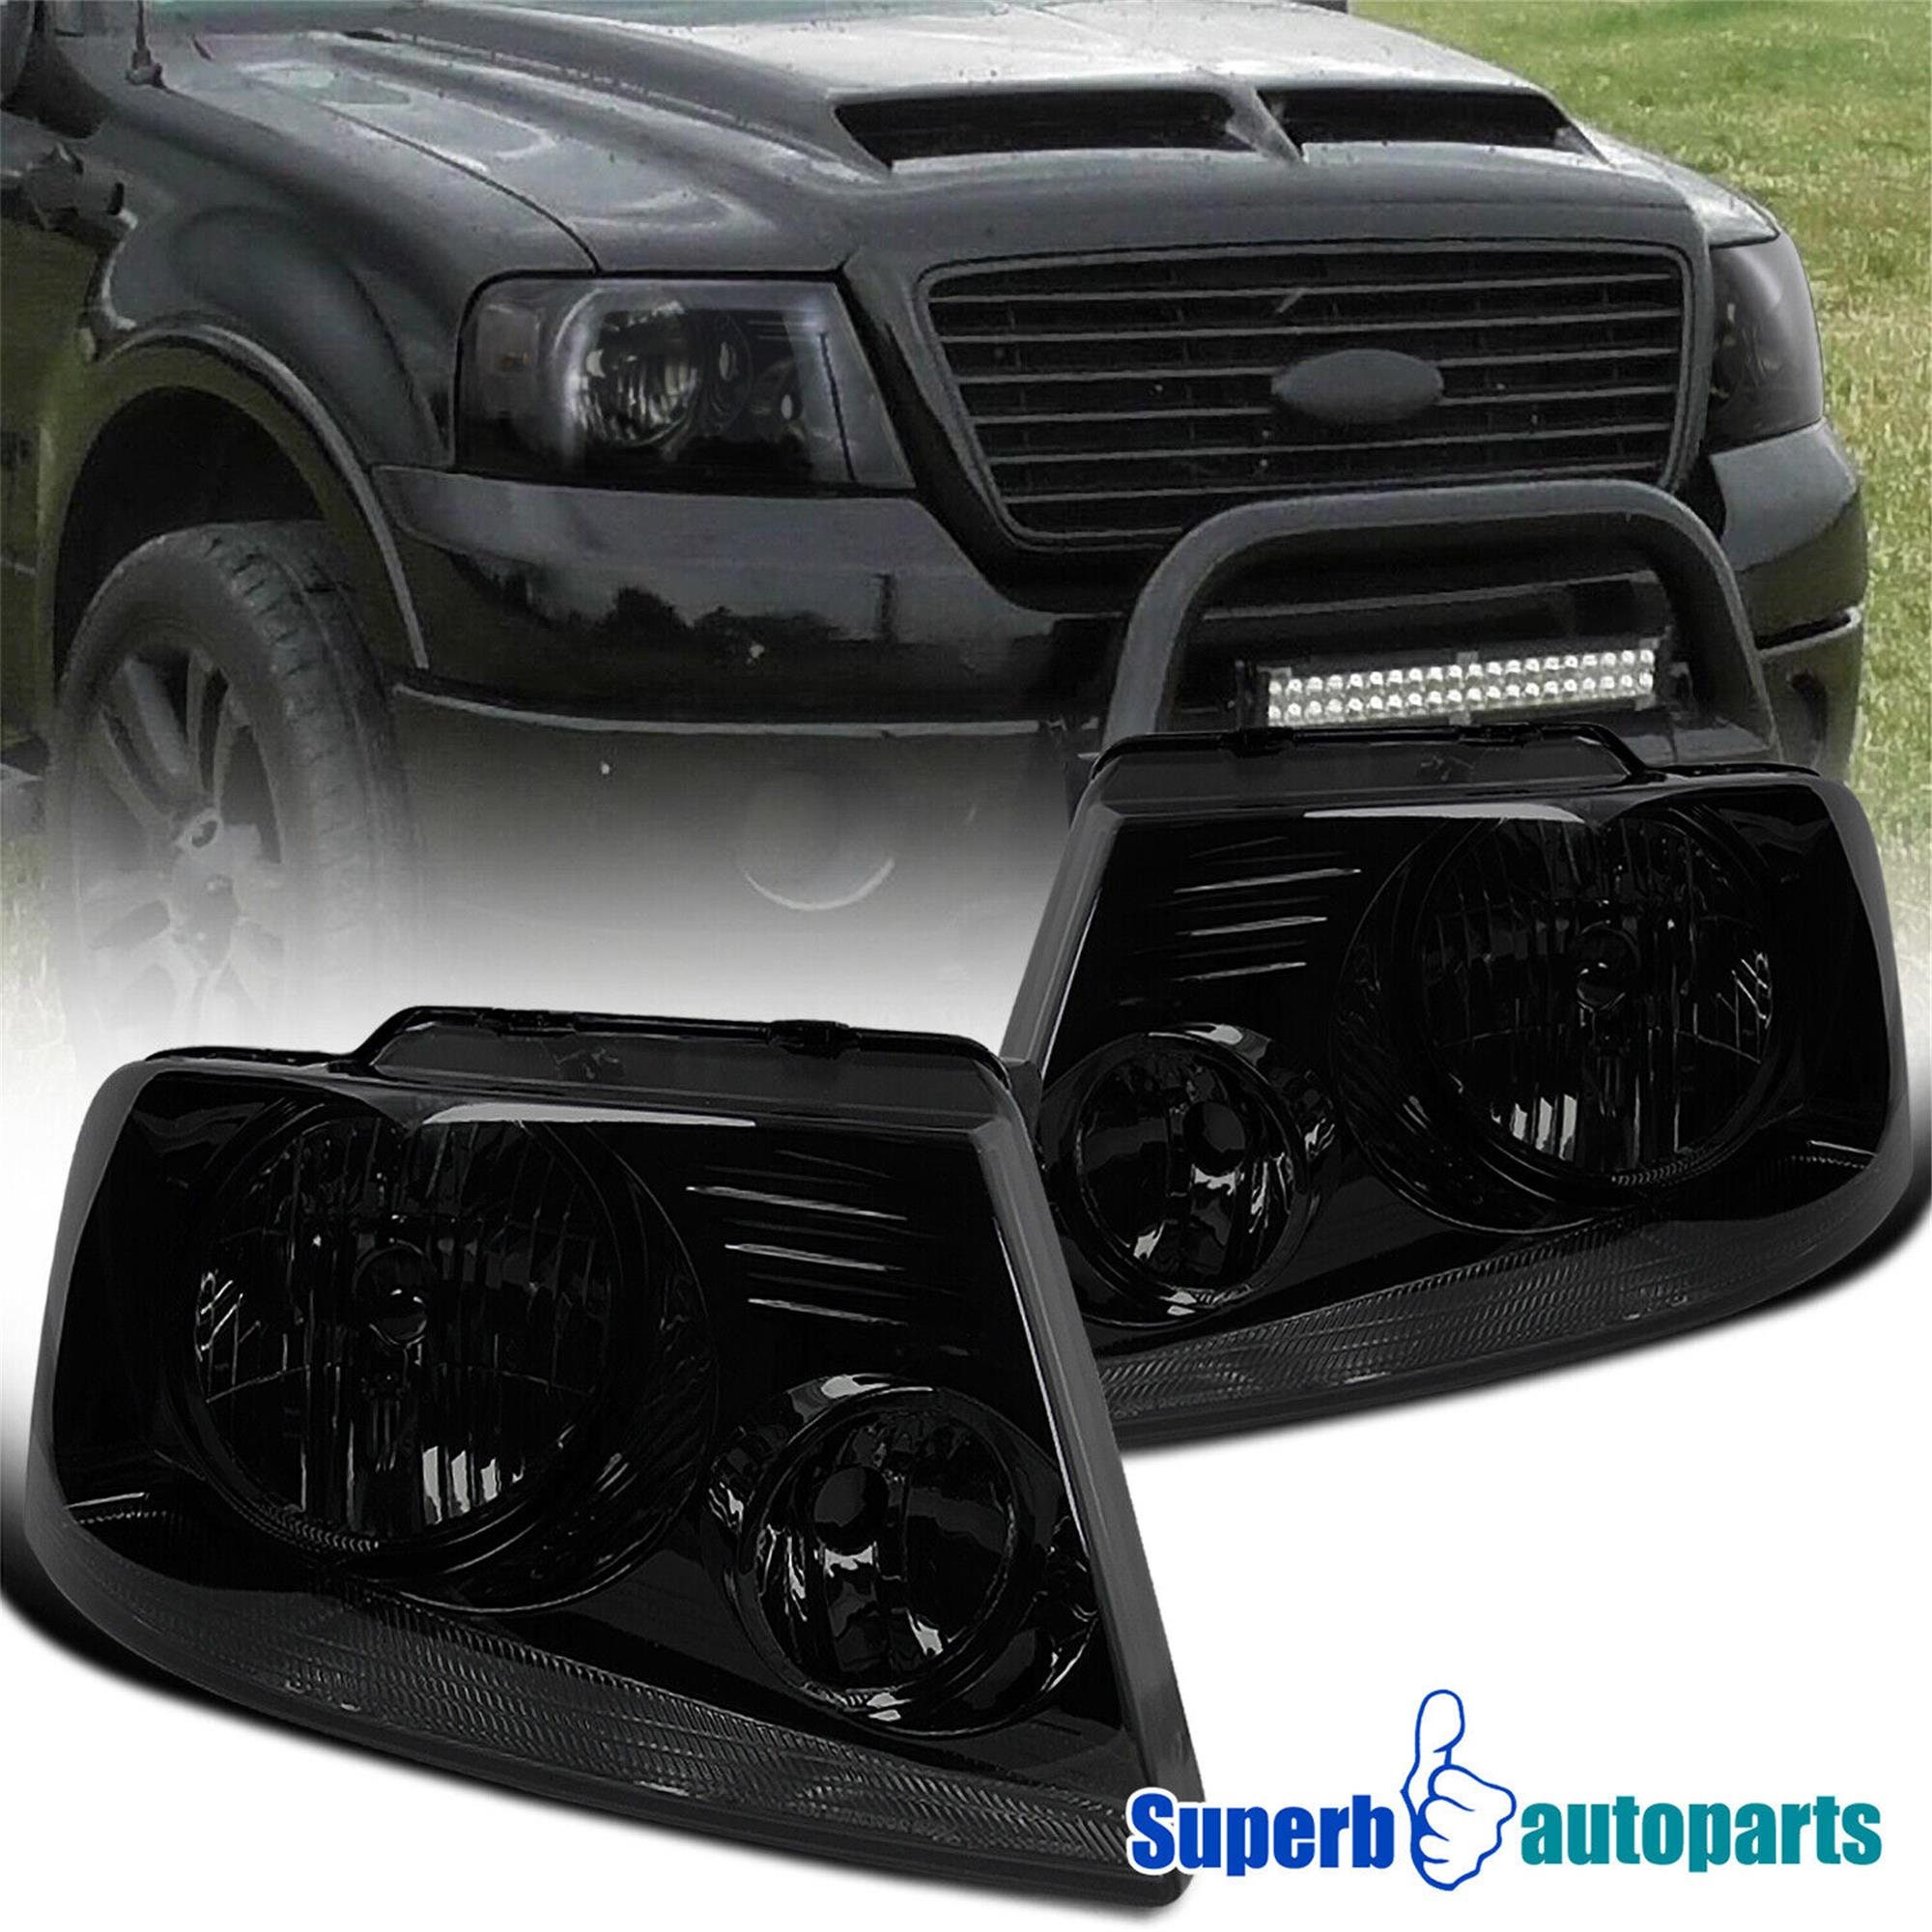 2006 Ford F150 Accessories Etsy